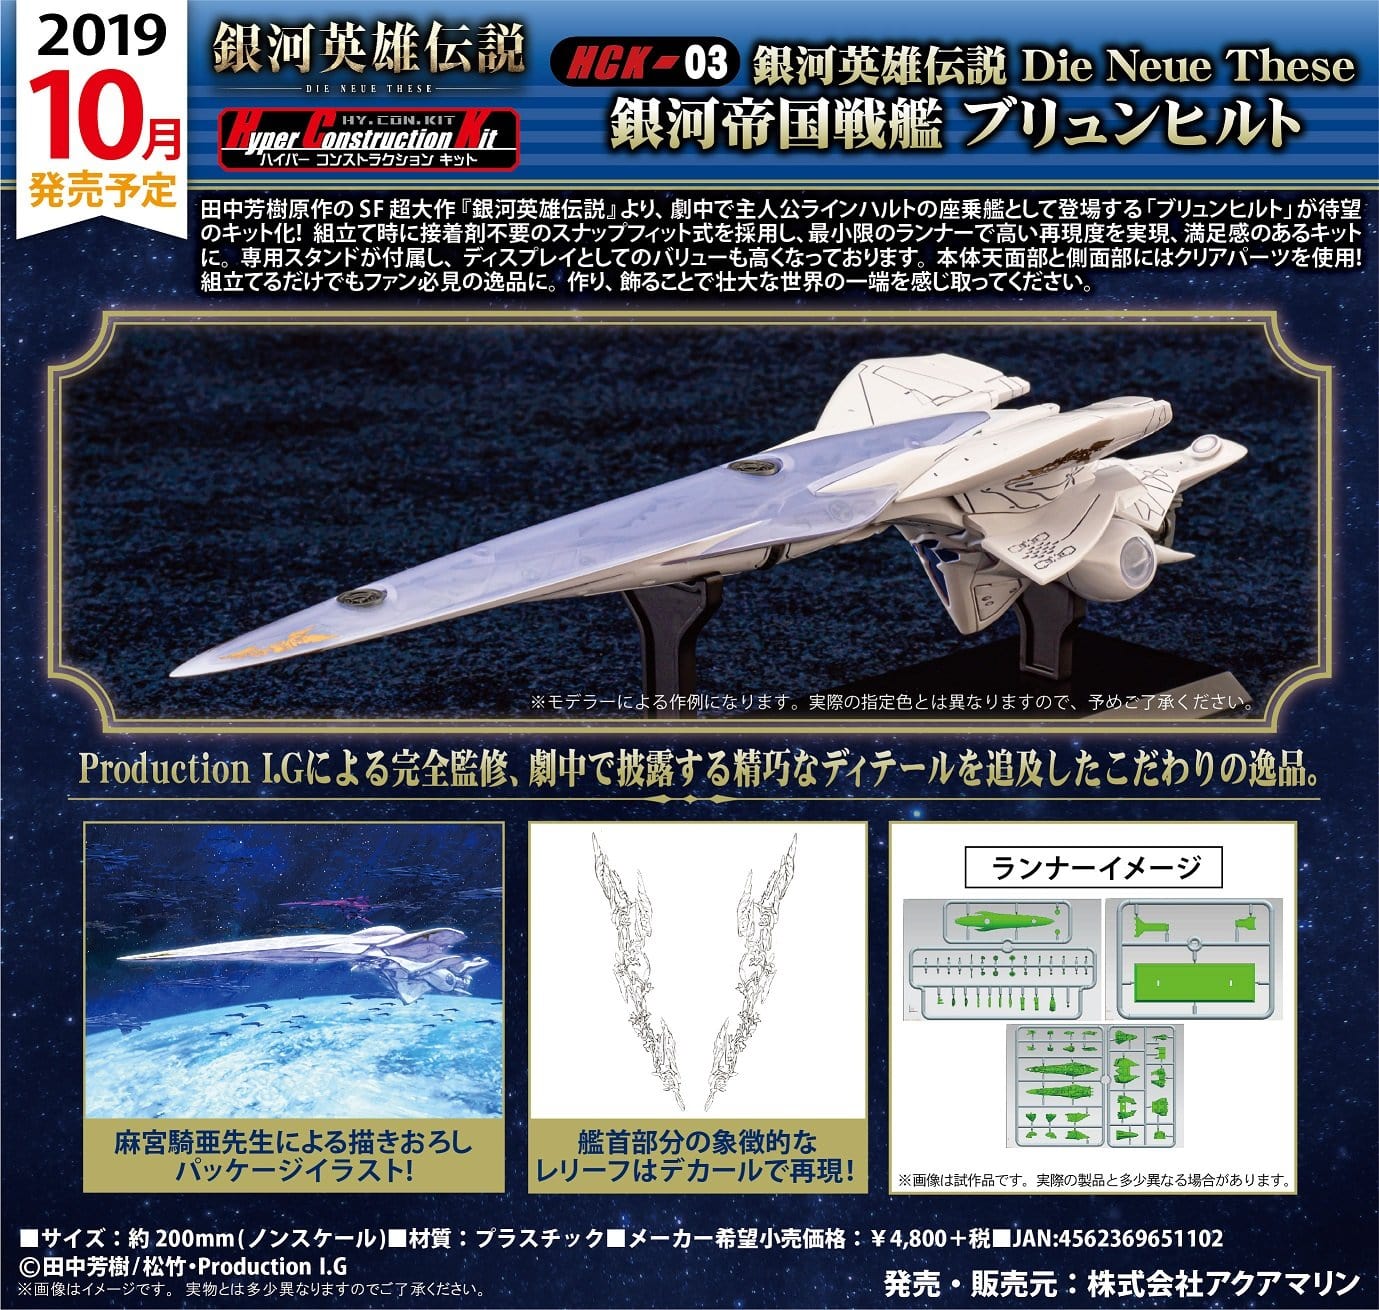 Aquamarine Legend of the Galactic Heroes Die Neue These - HCK-03 Galactic Empire battle ship